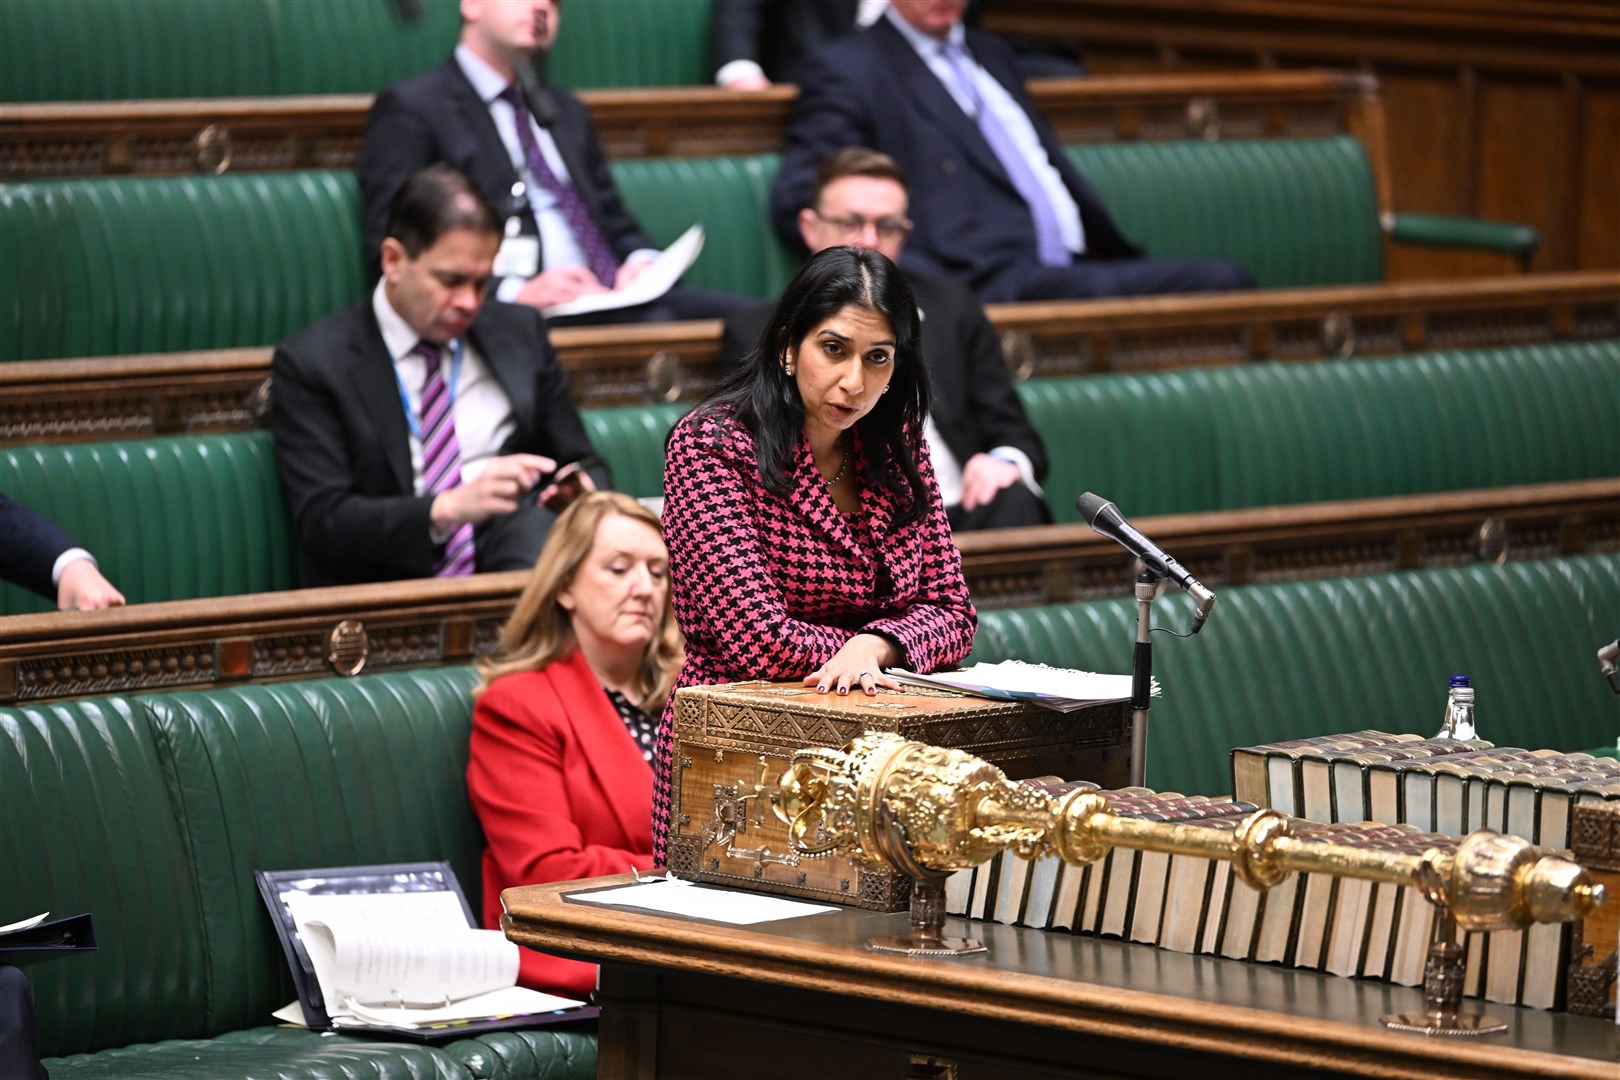 Home Secretary Suella Braverman said Carrick ‘should never have been allowed to remain as an officer for so long’ (UK Parliament/Jessica Taylor/PA)